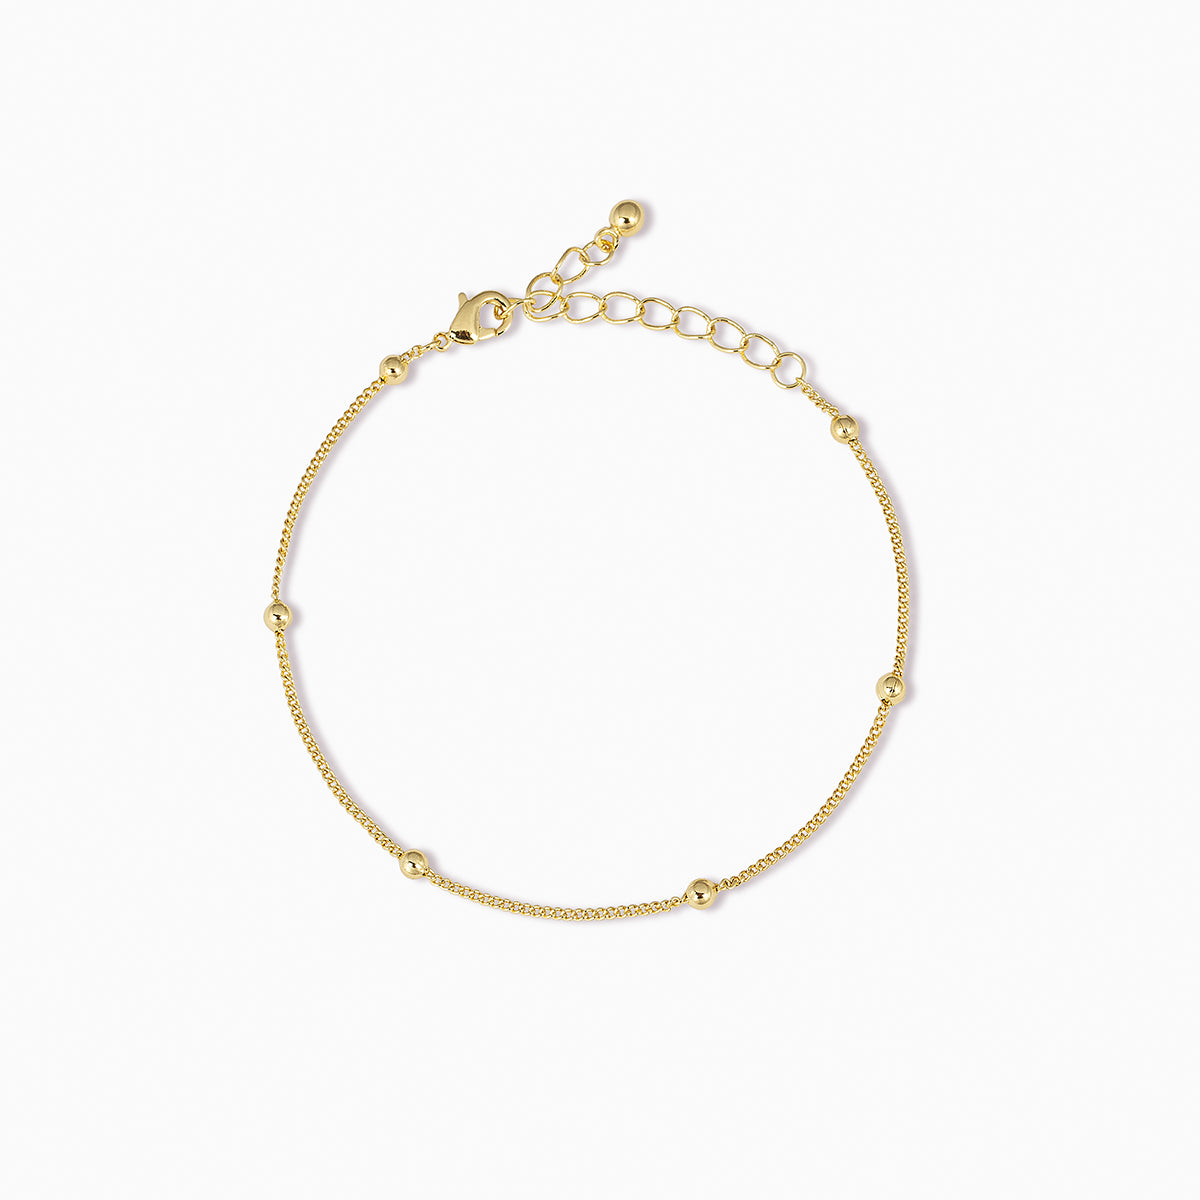 Everyday Dainty Bead and Chain Bracelet in Gold